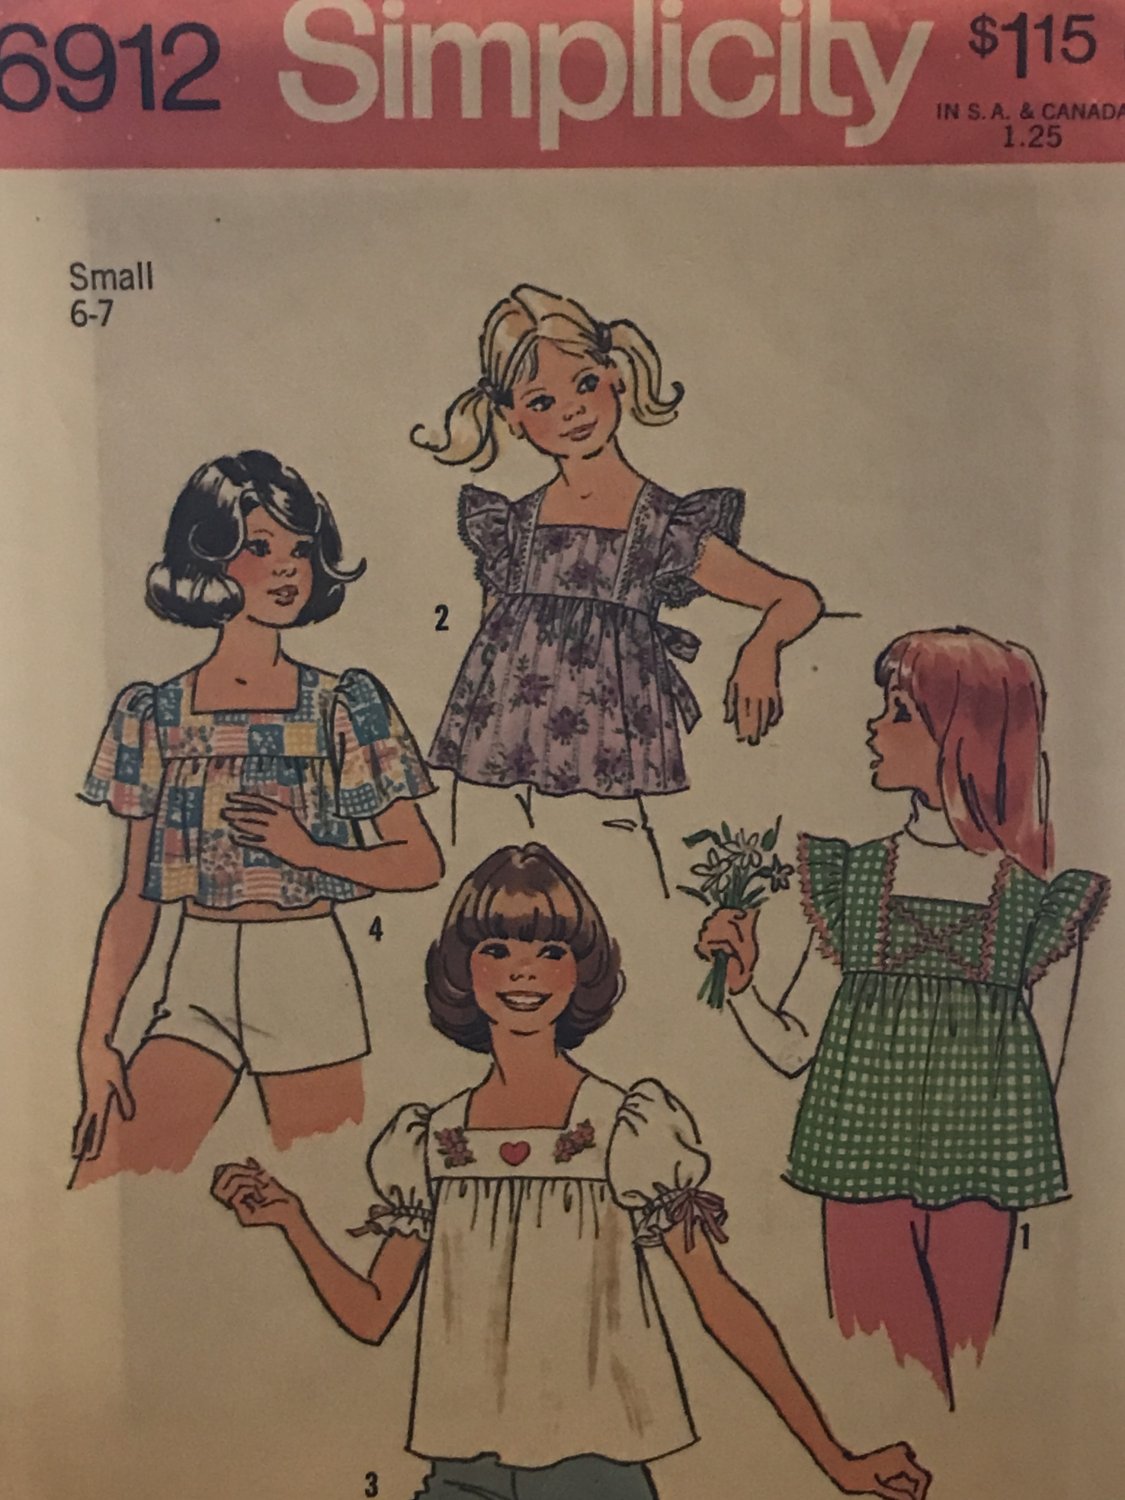 Simplicity 6912 Girls Tops sewing pattern size 6-7